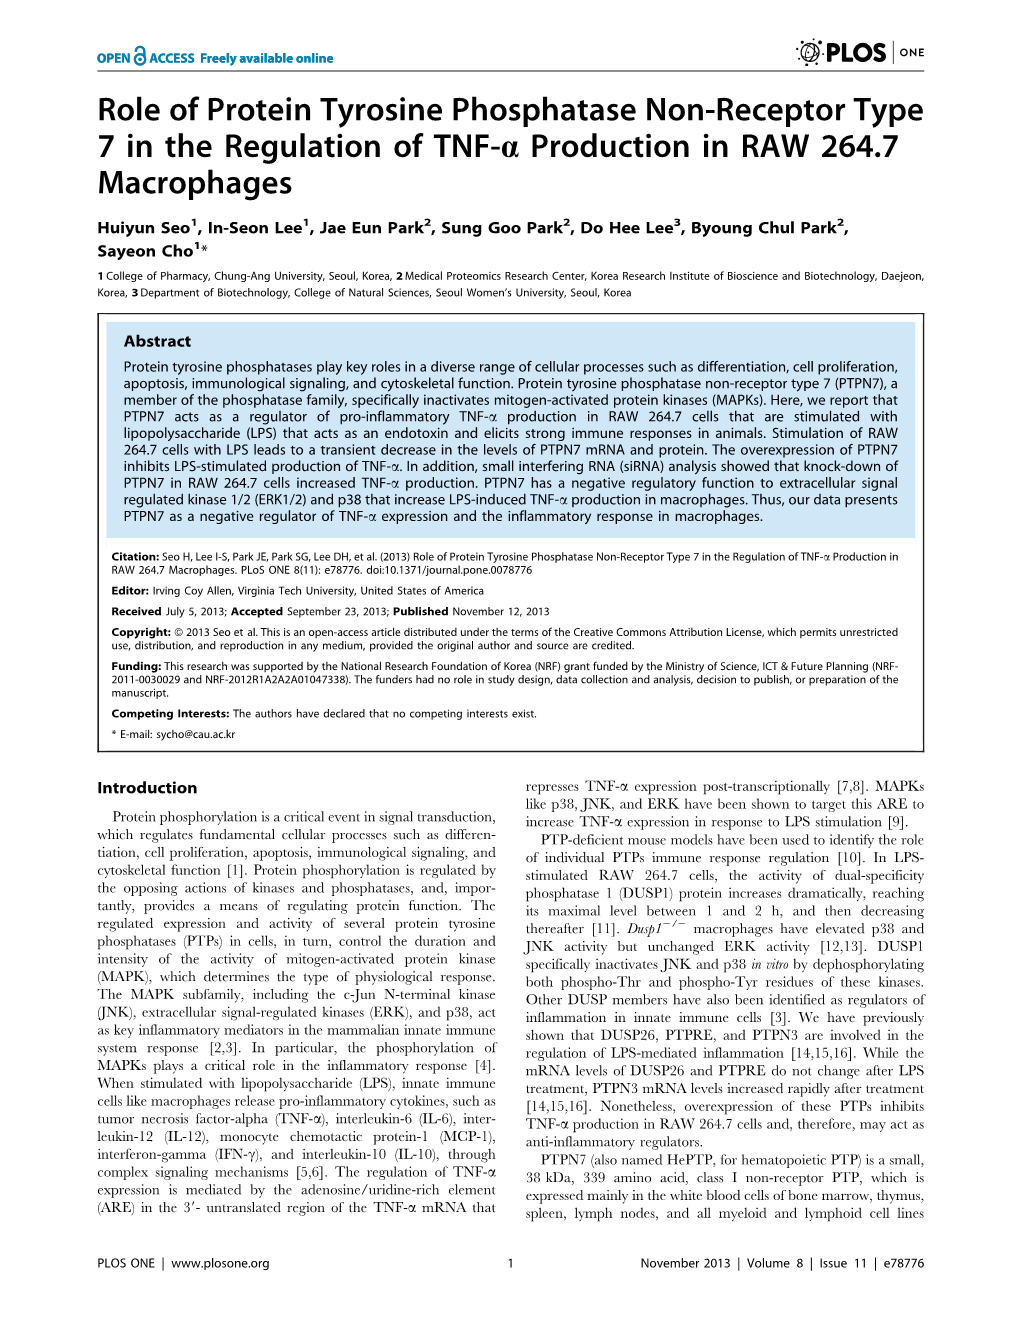 Role of Protein Tyrosine Phosphatase Non-Receptor Type 7 in the Regulation of TNF-A Production in RAW 264.7 Macrophages